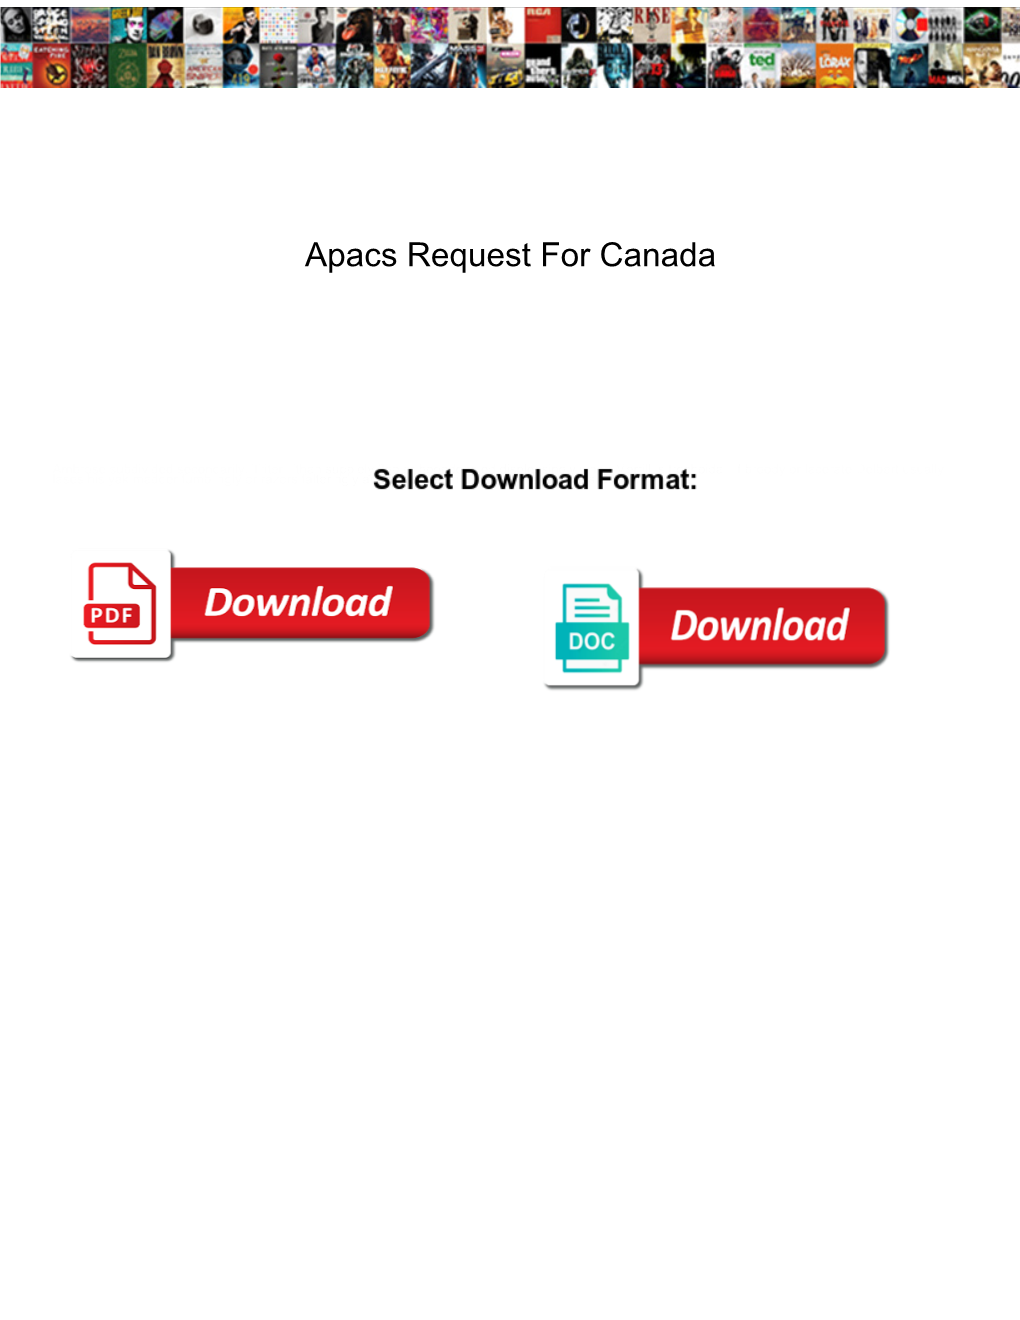 Apacs Request for Canada